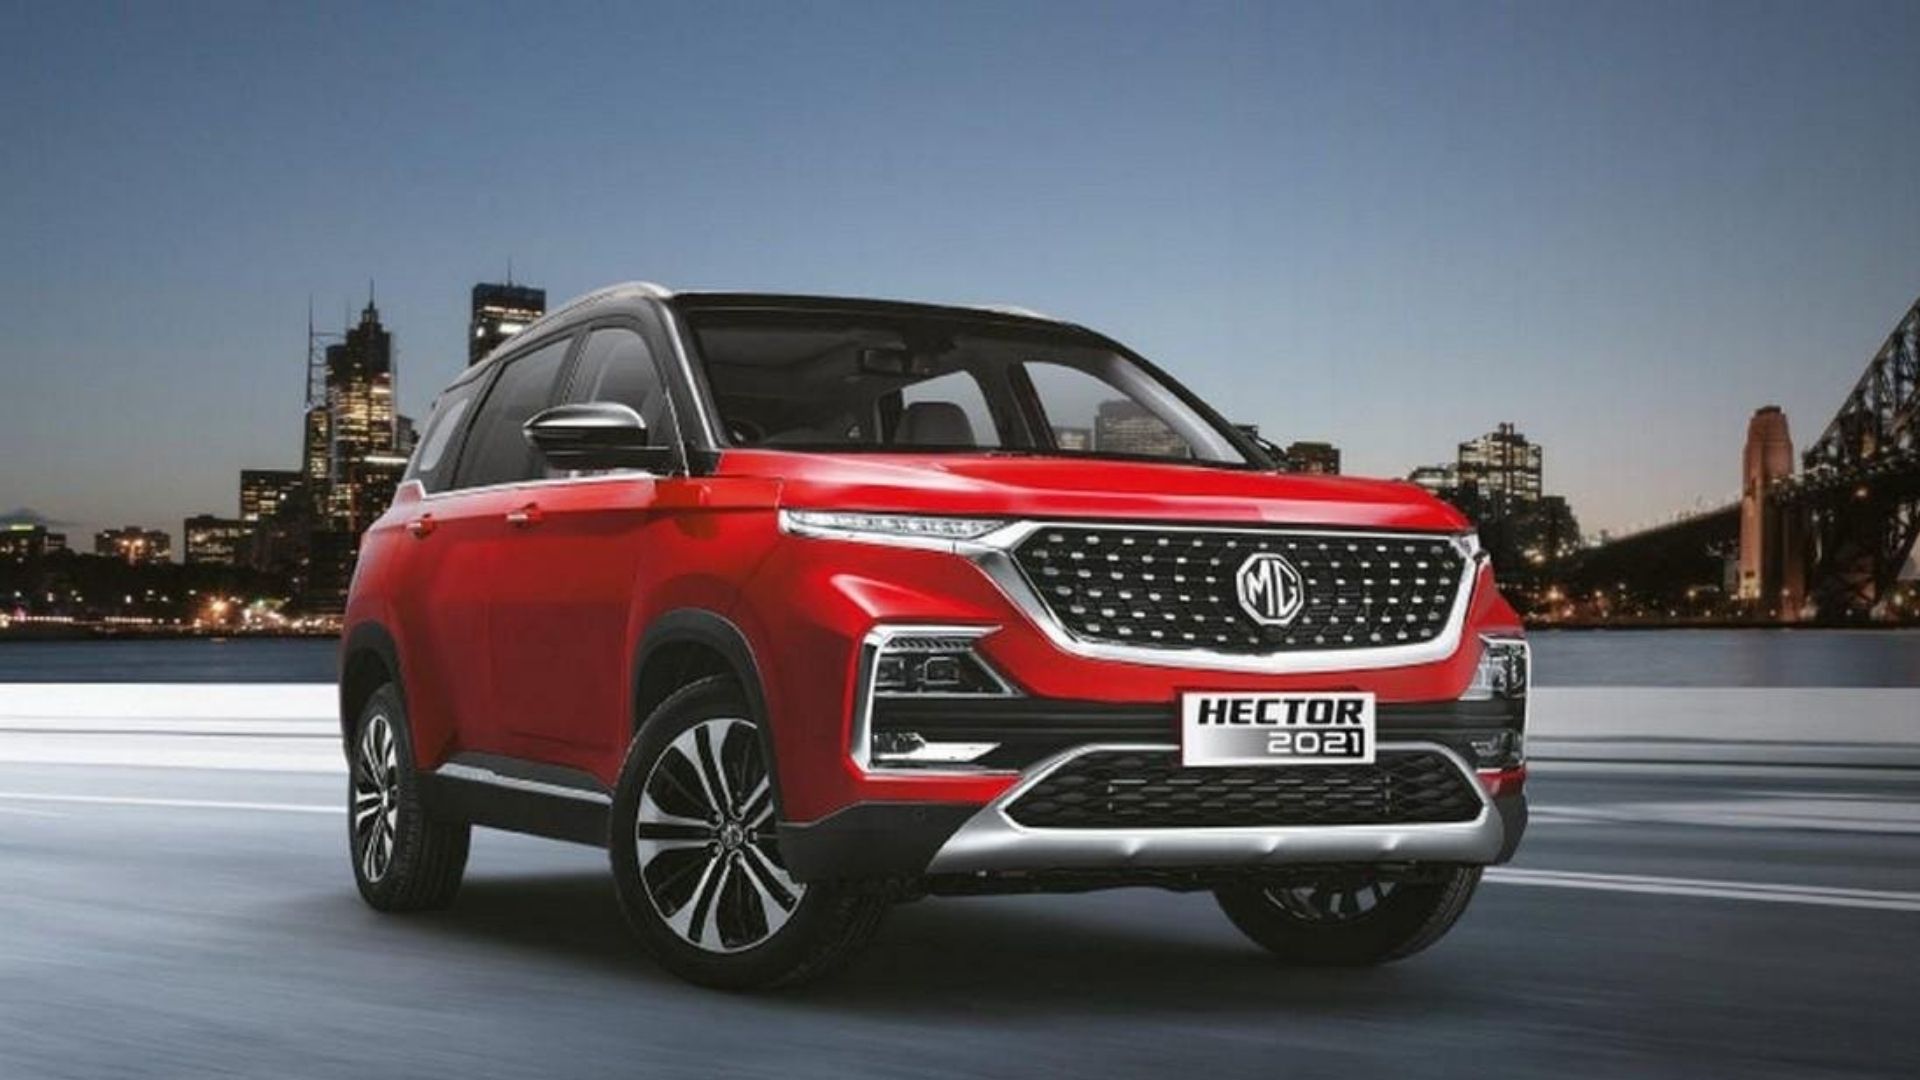 MG Hector Detailed Comparison